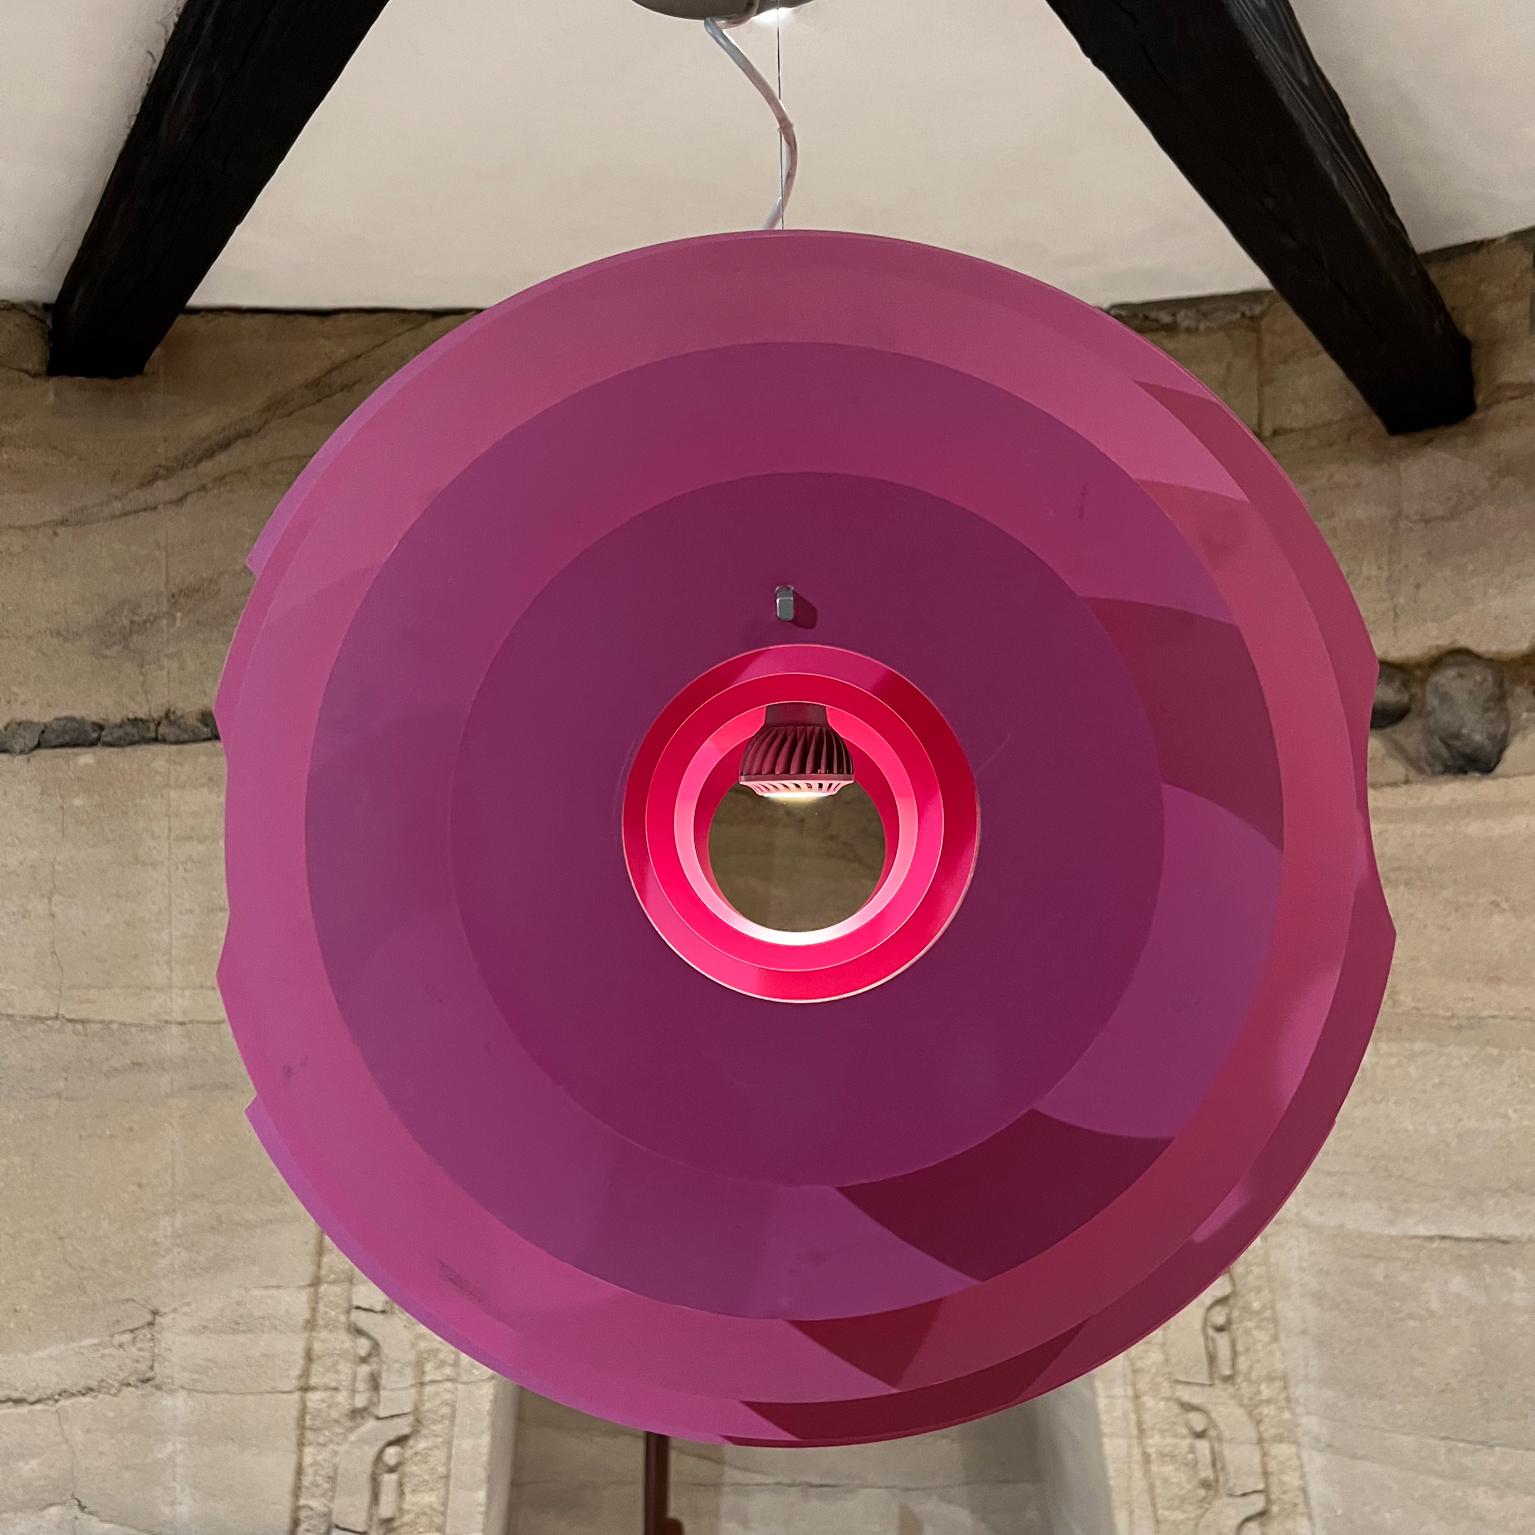 Supernova Suspension lamp by architect designer Ferruccio Laviani for Foscarini Made in Italy
Light provides diffused illuminance in all directions
22.5 w x 20 d x 32.5 tall
Fabulous Colors of Fuchsia Pink
Coated Aluminum layered Metal
Preowned